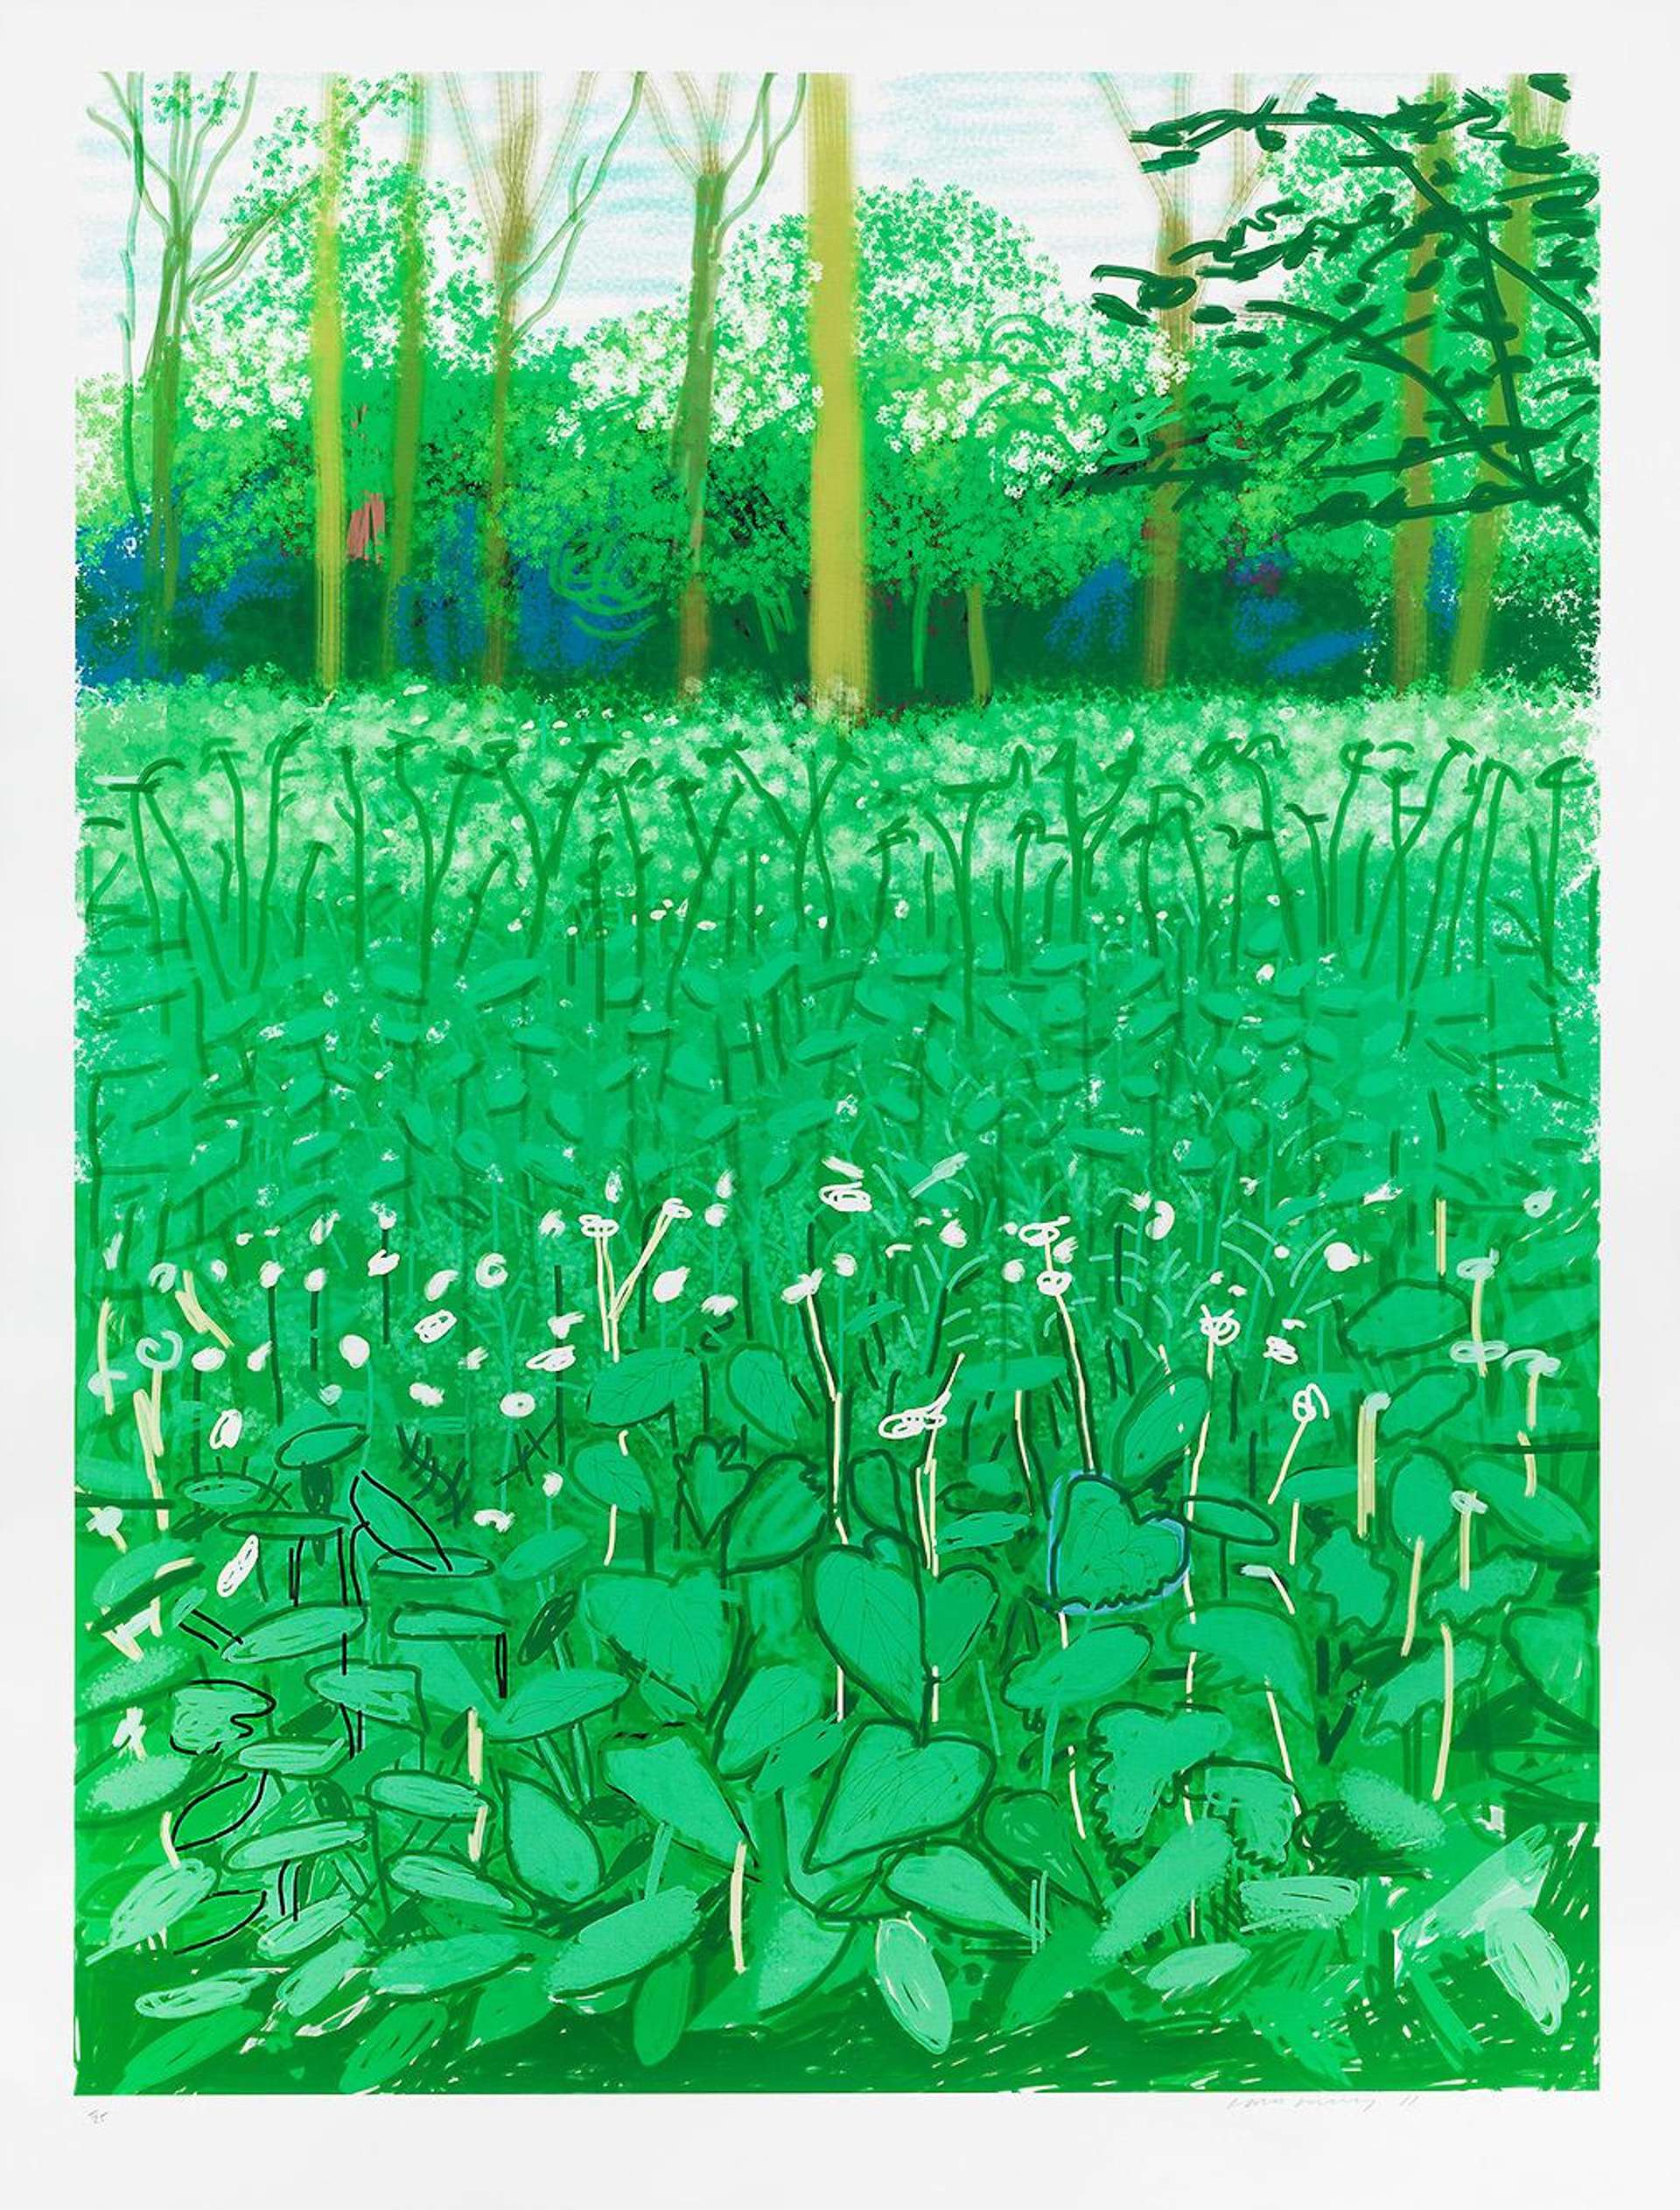 A landscape view by David Hockney, showing a bright green grassy field punctuated by white flowers.